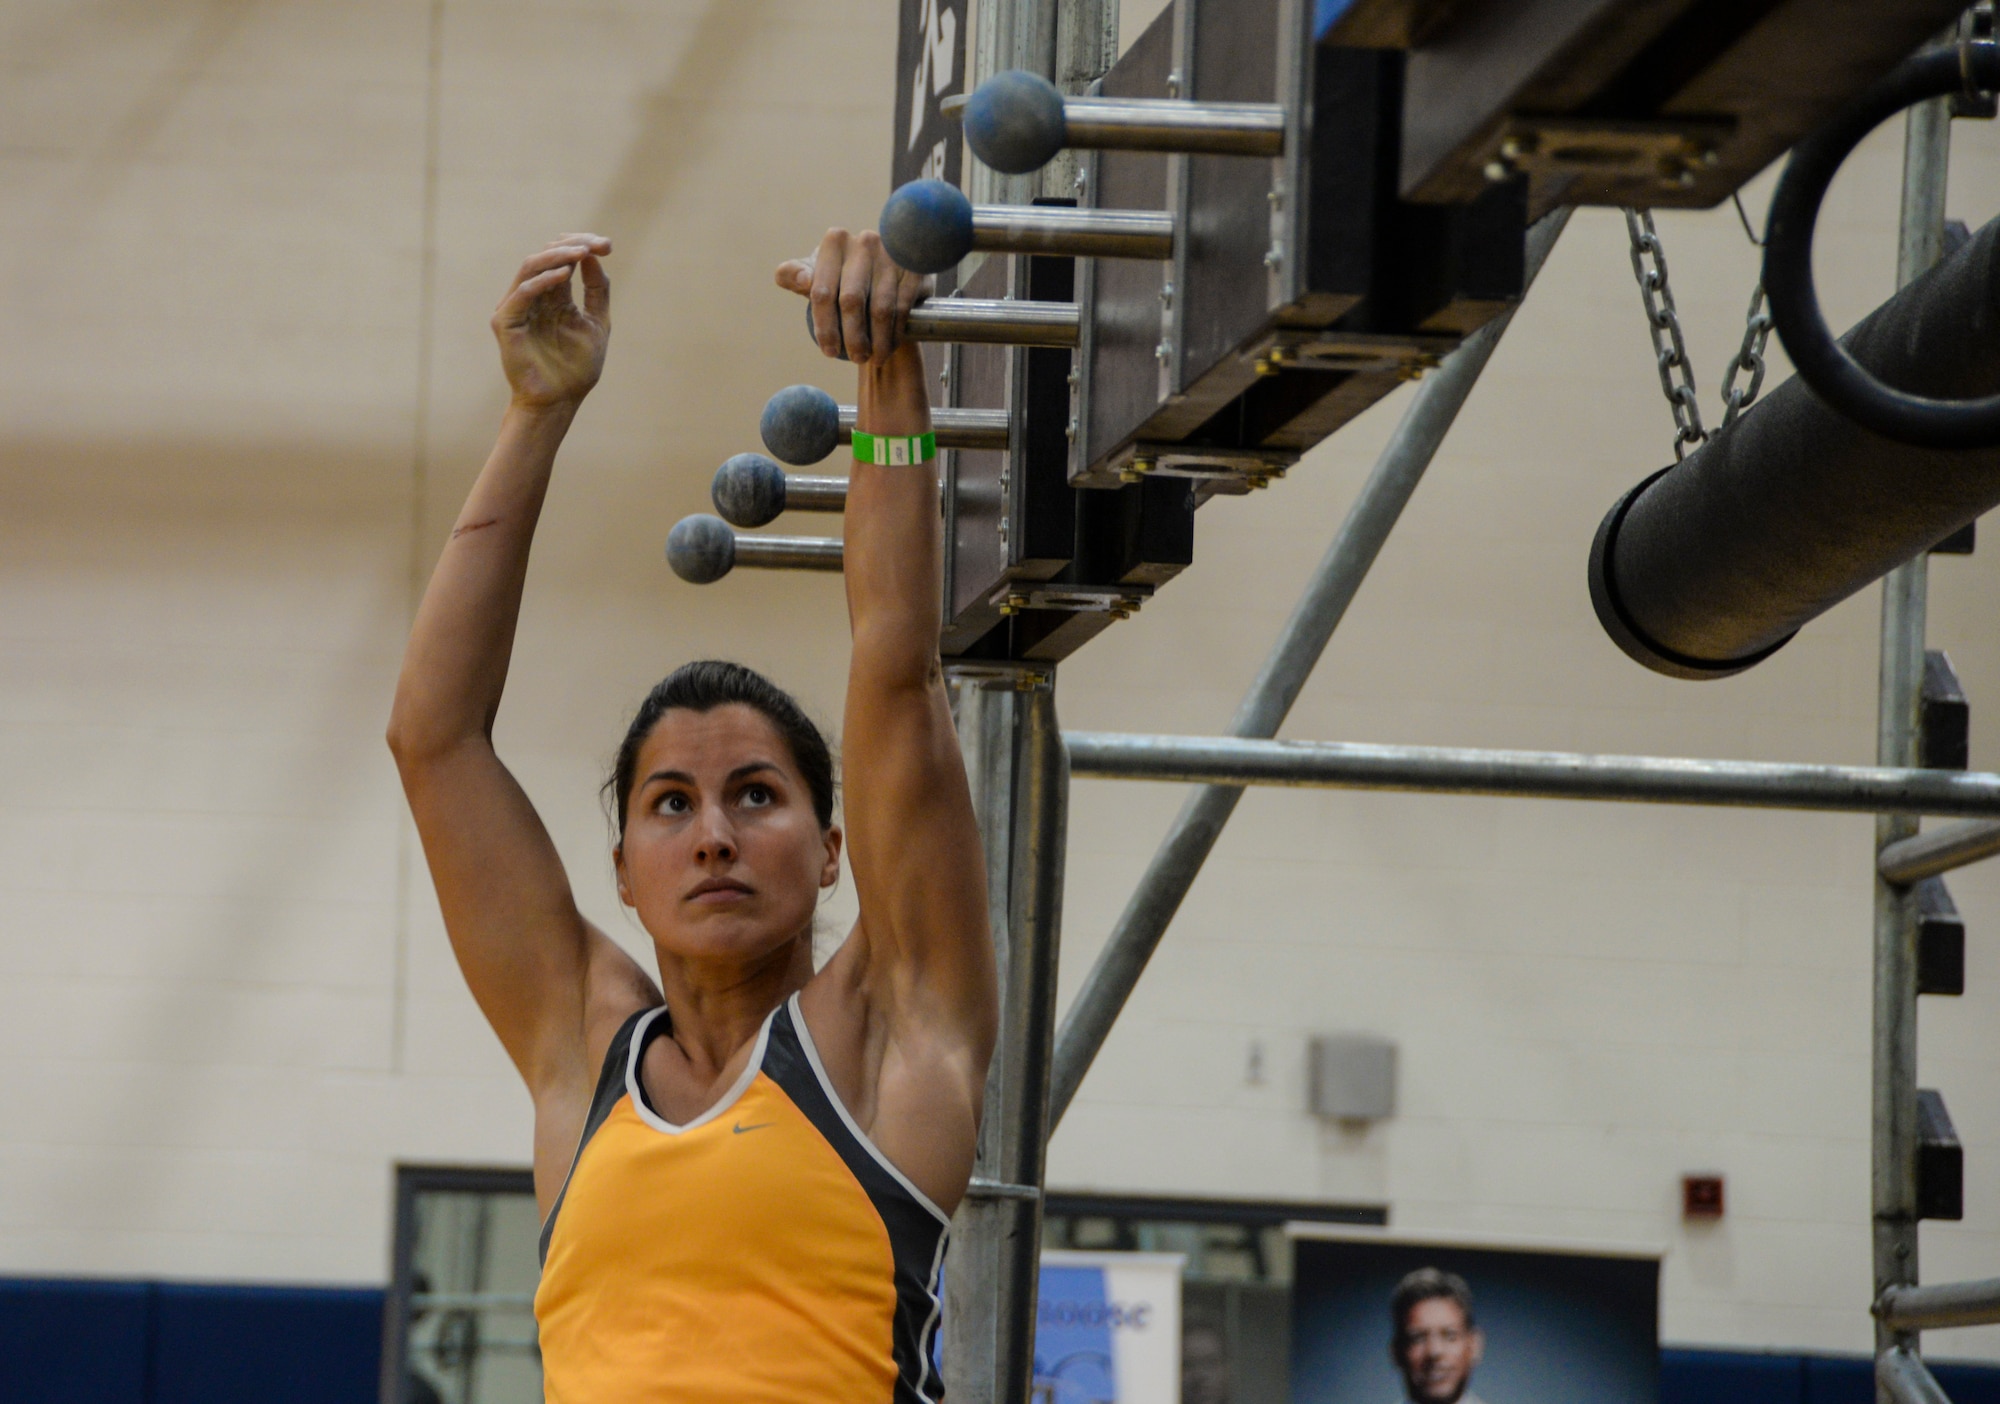 A Team Scott member participates in the Alpha Warrior challenge obstacle course. The event took place July 18-19 at the James Sports Center.
(U.S. Air Force photo by Senior Airman Melissa Estevez)